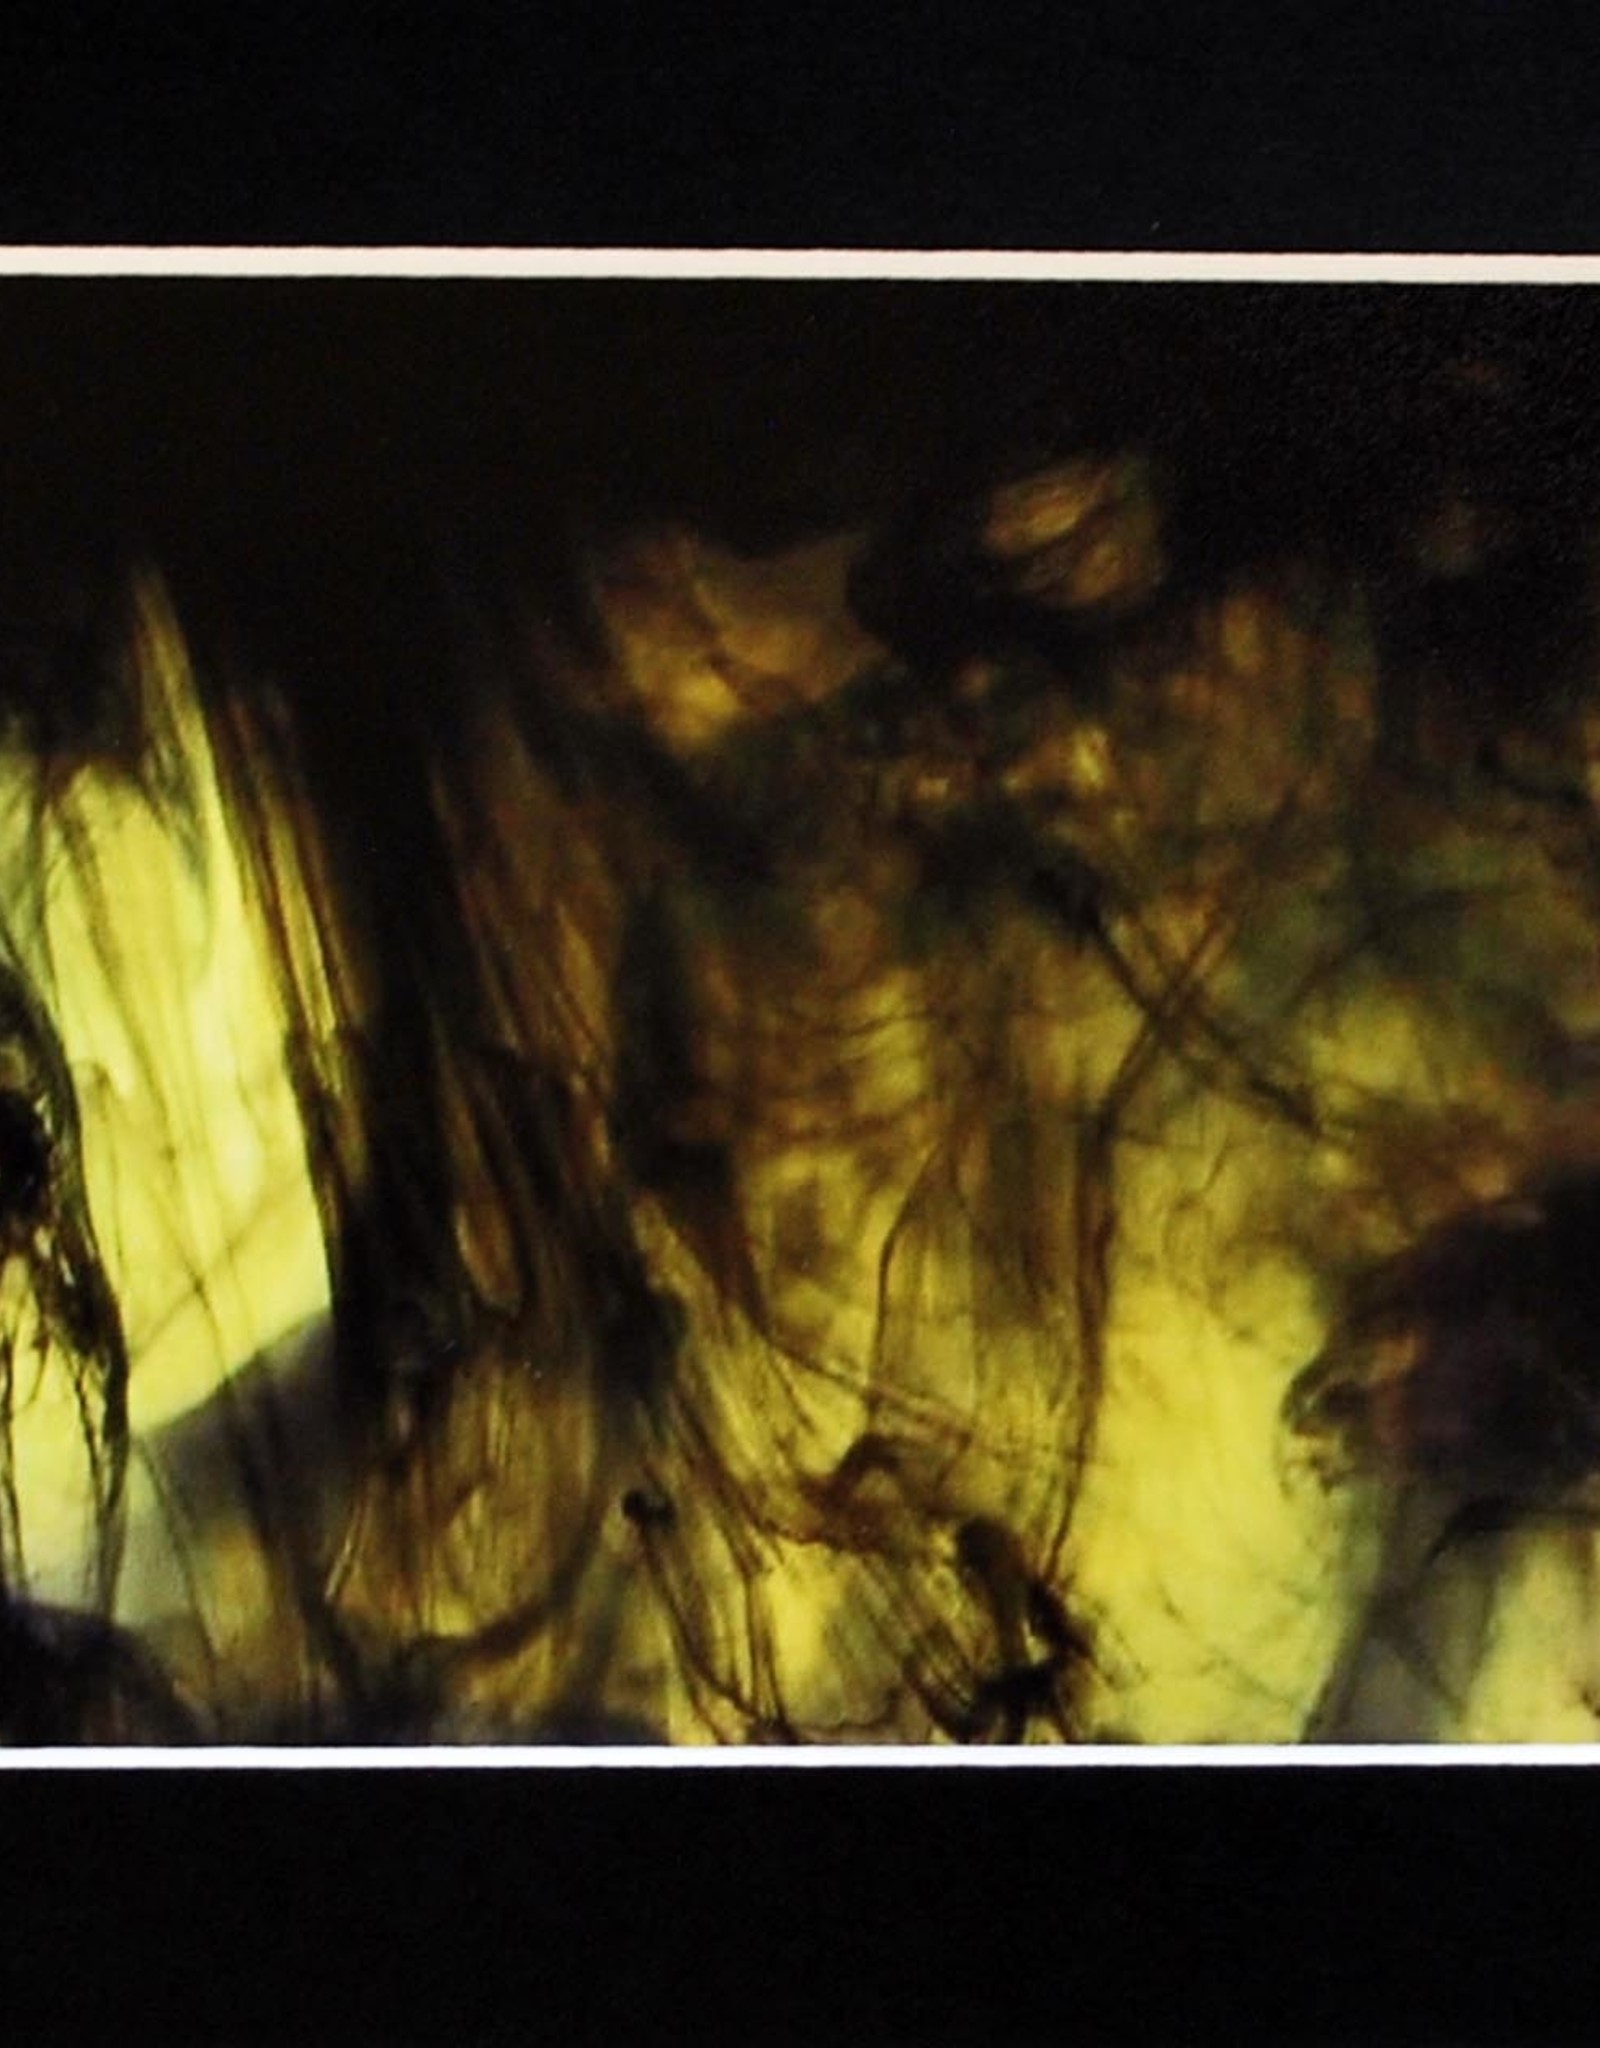 Daria Percy Untitled 2 (chartreuse) Matted 4x6 photograph by Daria Percy